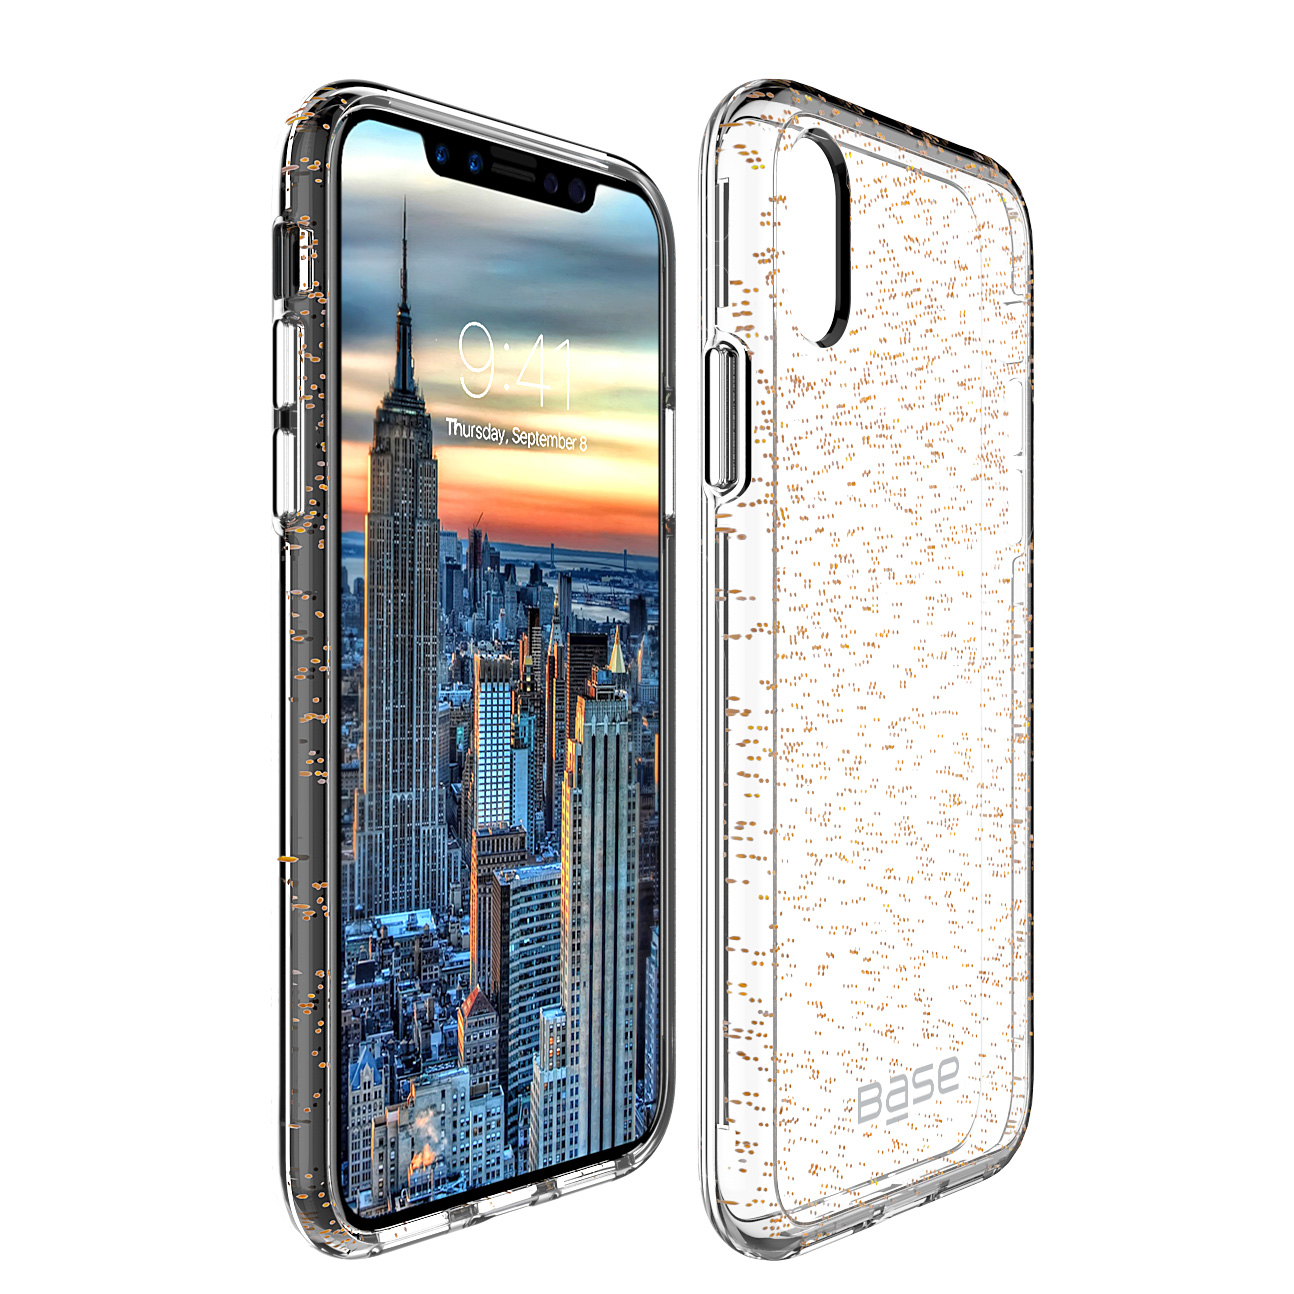 Base Crystal Shield - Reinforced Bumper Protective Case for iPhone X - Gold Glitter